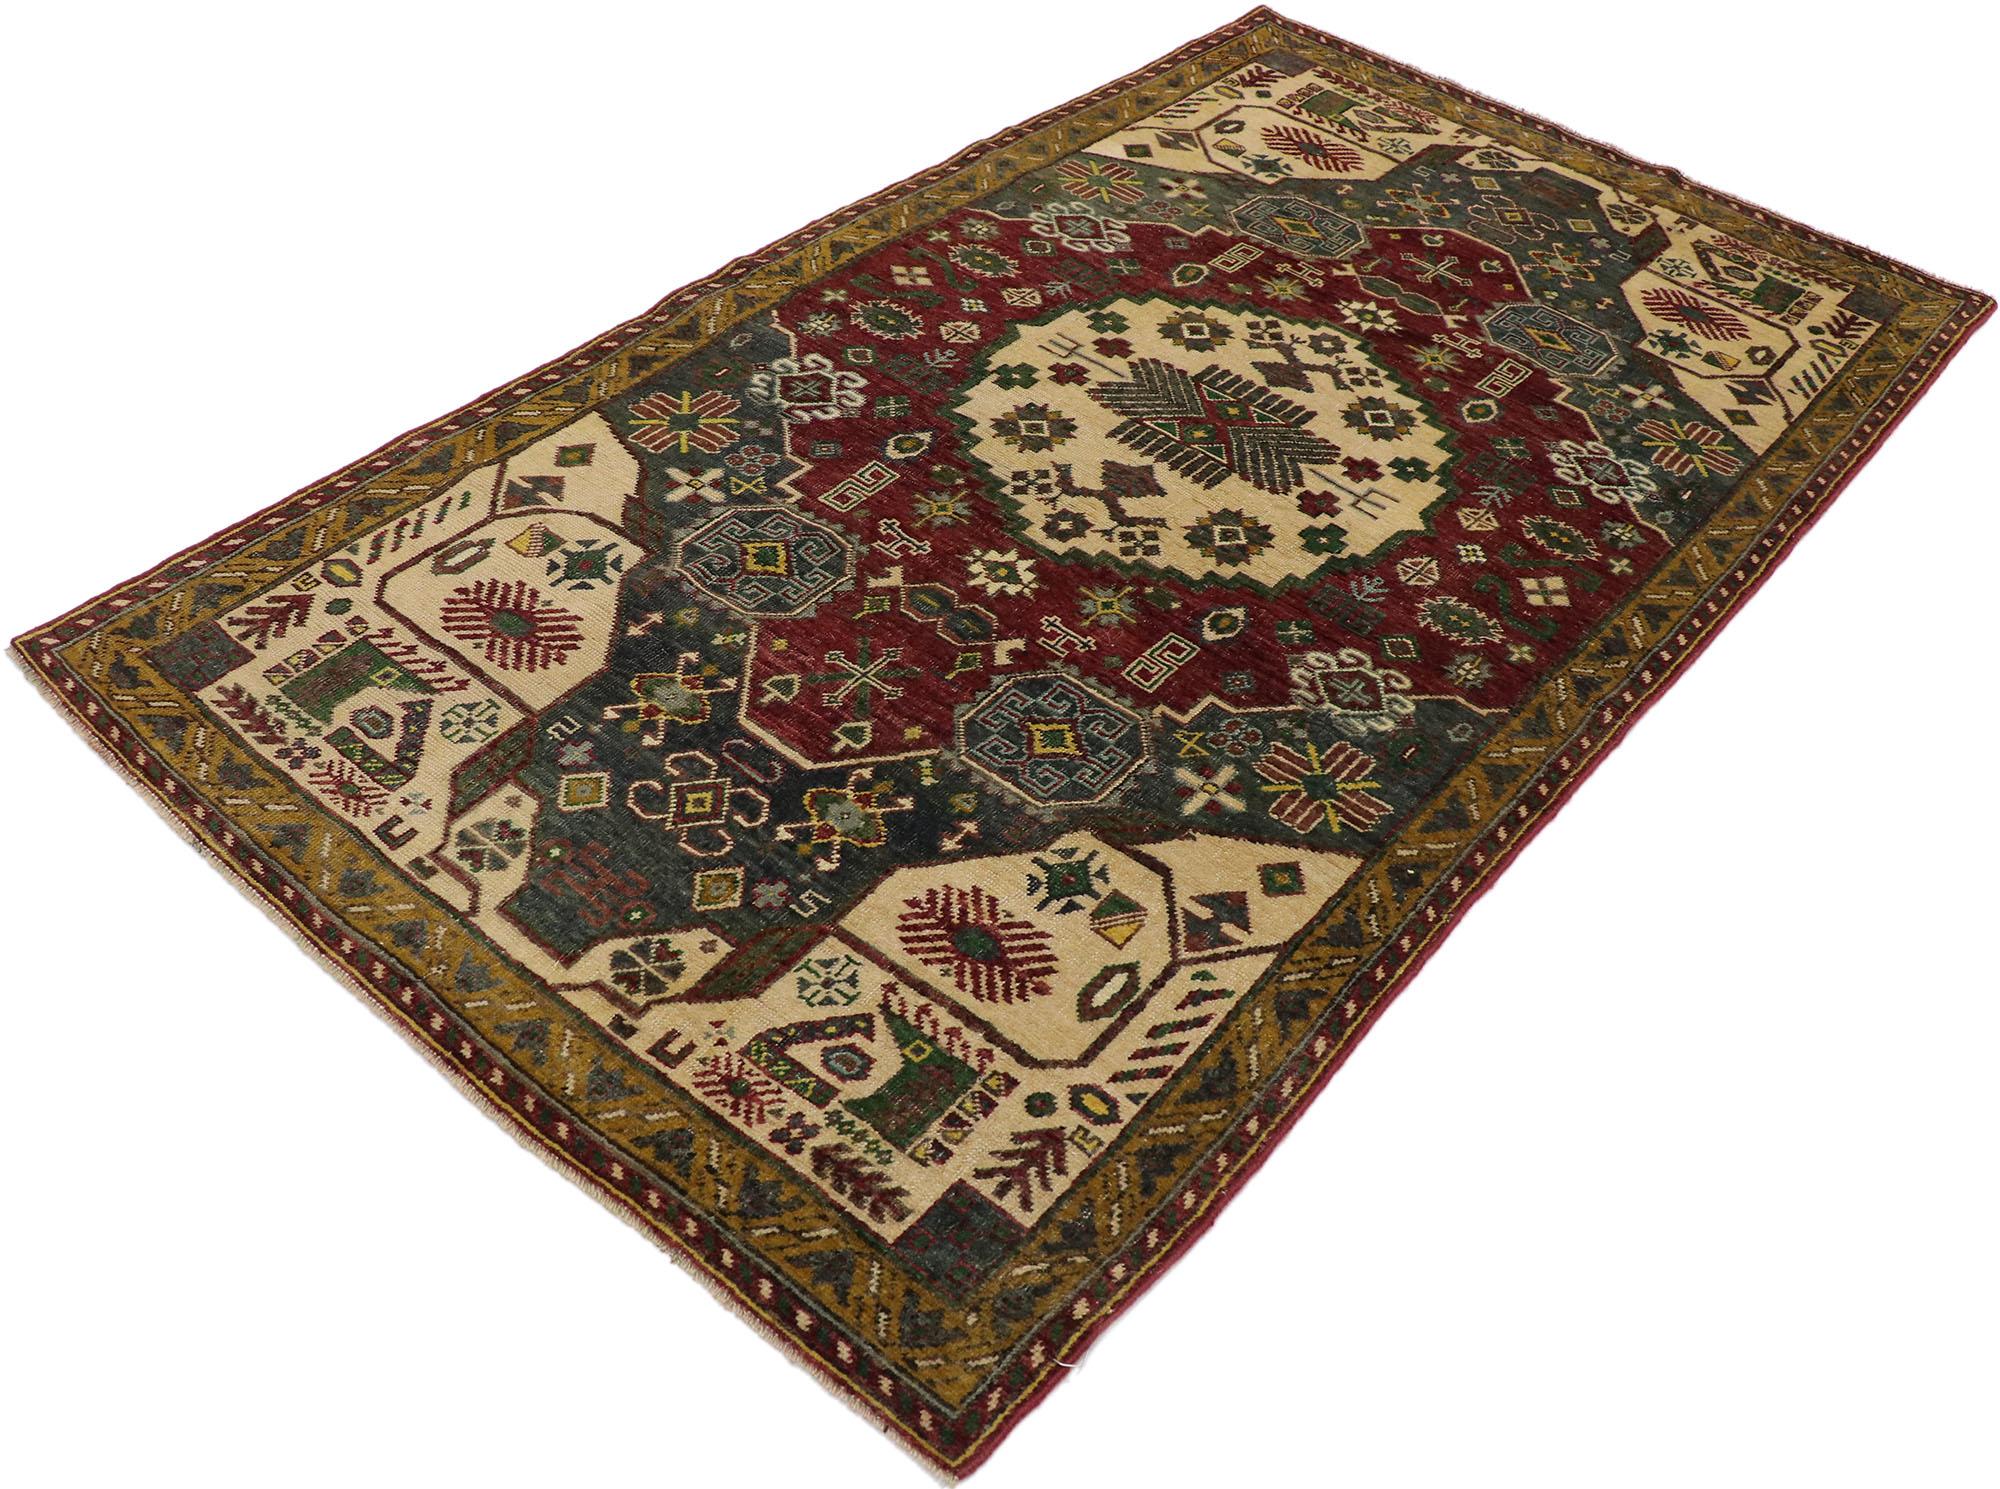 53177, vintage Turkish Oushak rug with Tribal style. Embodying tribal style and charm with saturated colors, this hand knotted wool vintage Turkish Oushak rug is a captivating vision of woven beauty. The abrashed field features a round central